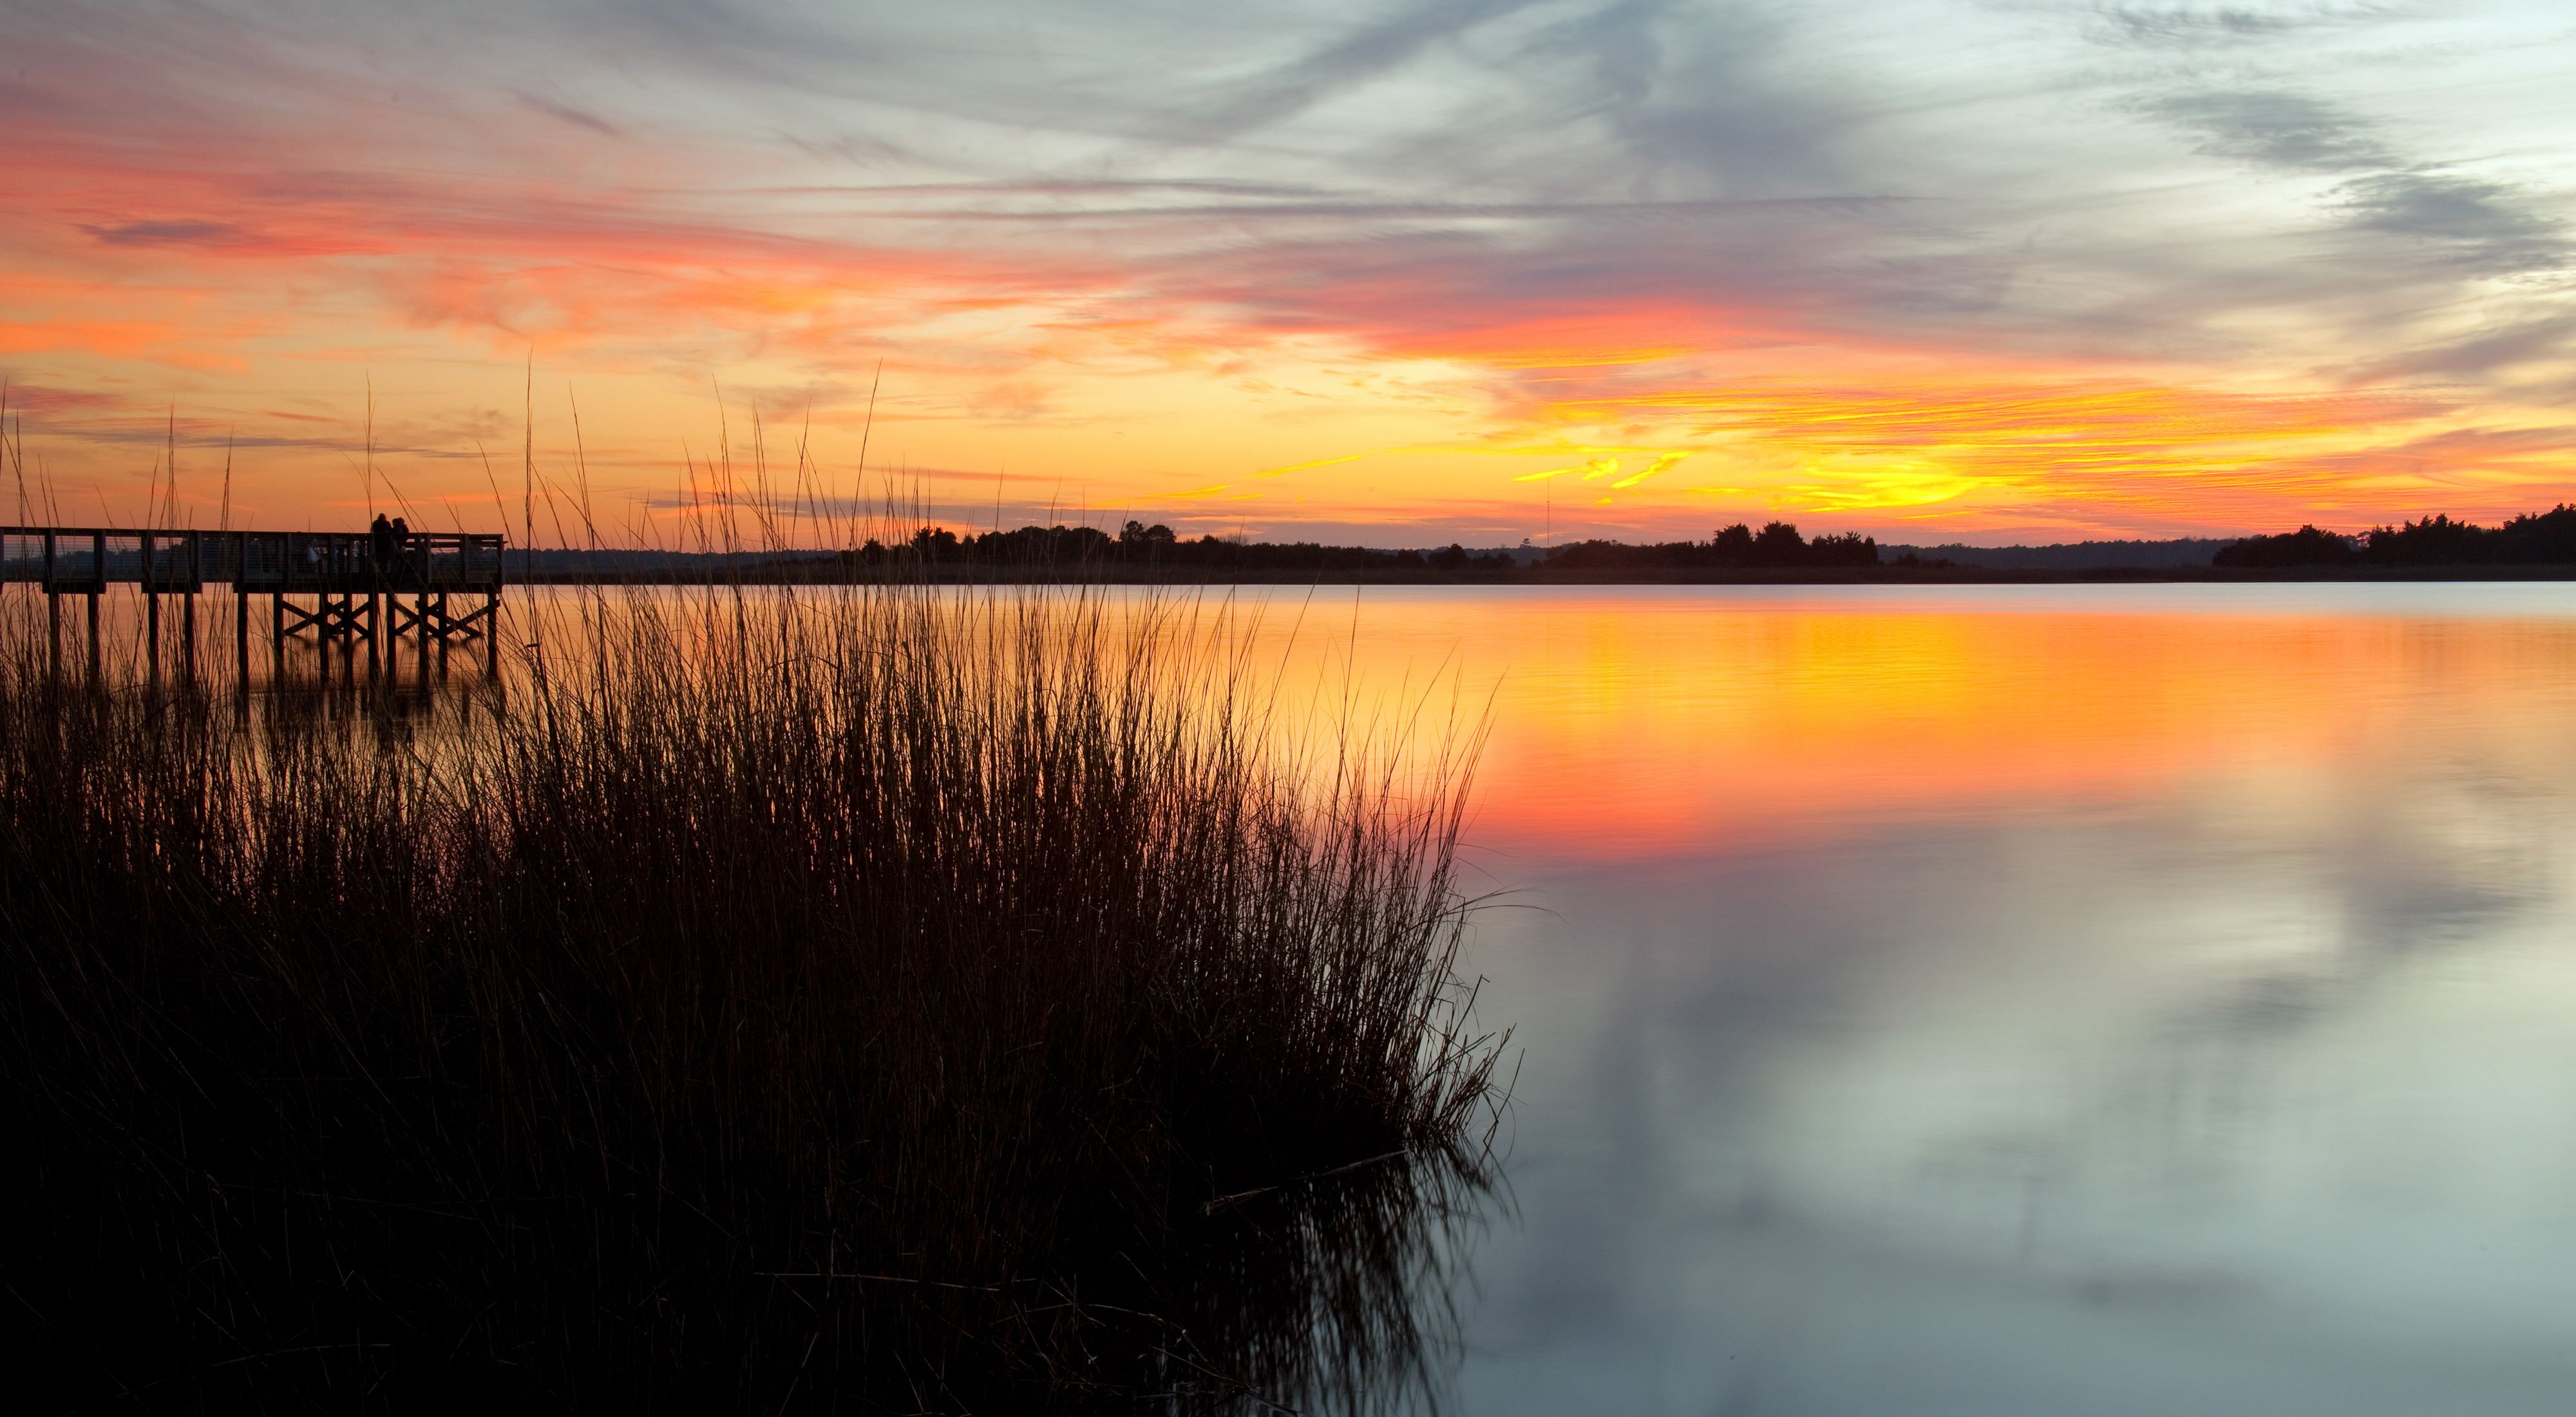 A sun sets over calm waters and a patch of grass.